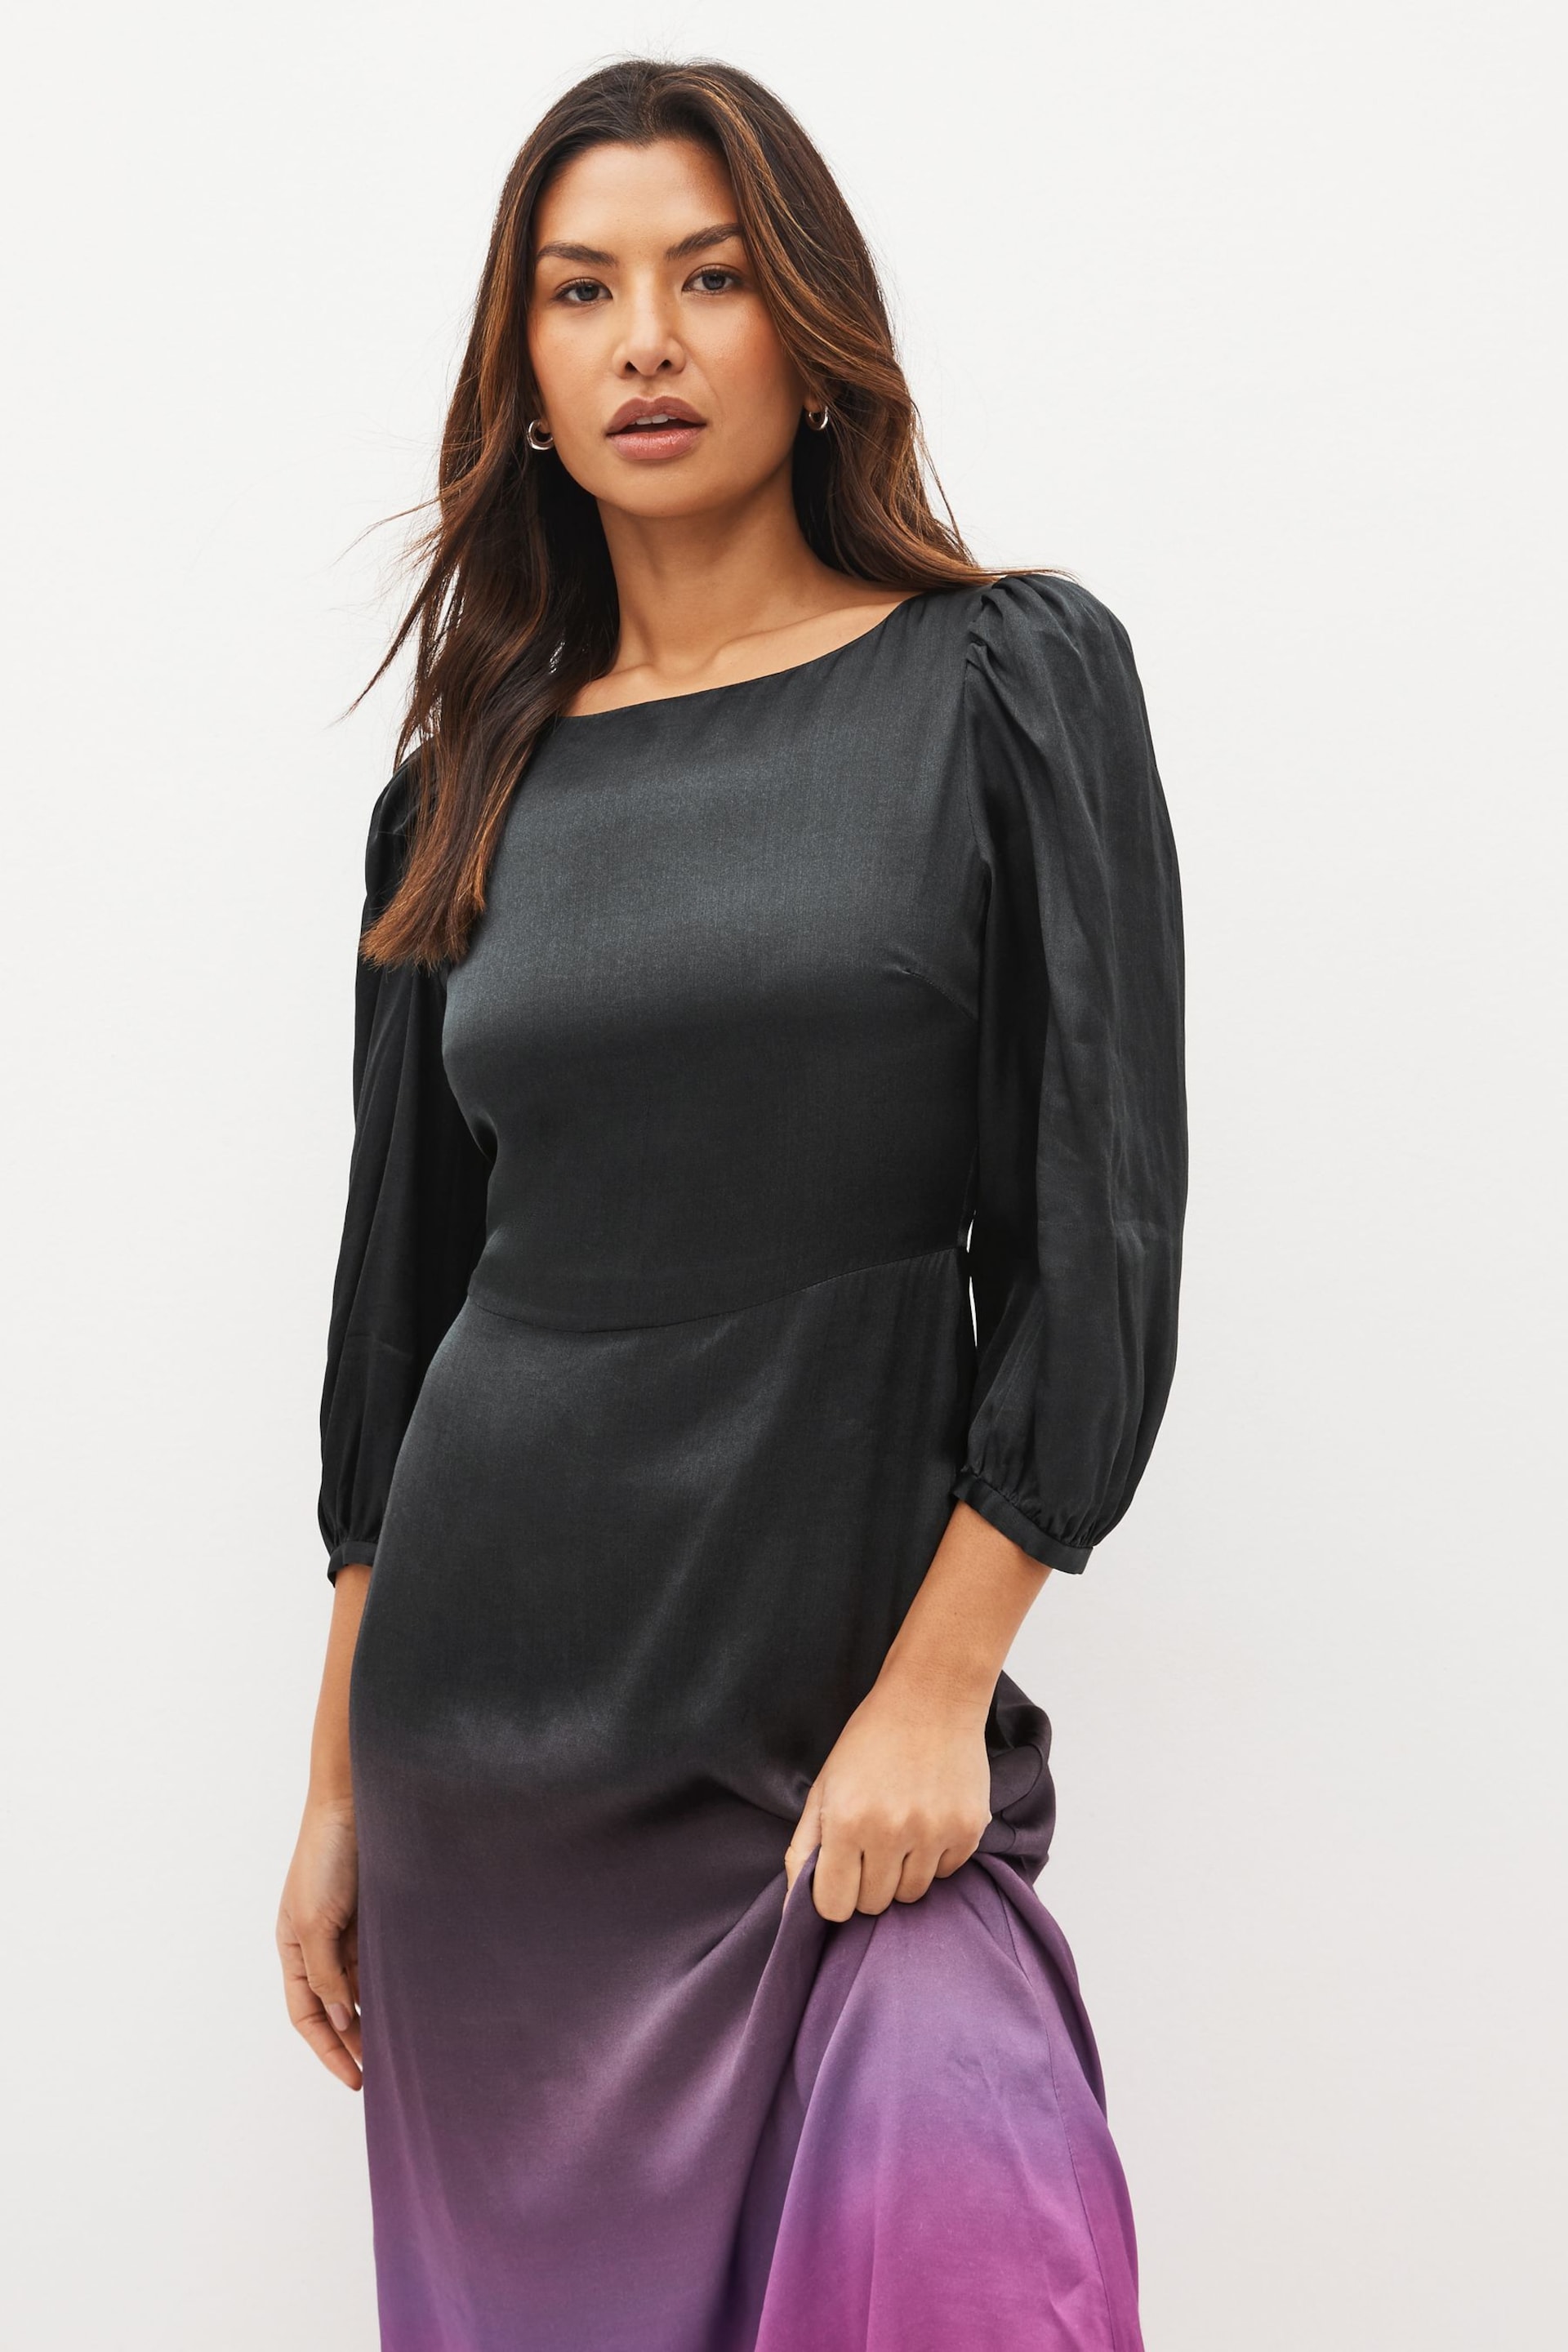 Olivia Rubin Lara Ombre Black Midi Dress with Puff Sleeve and a Fitted Waist - Image 3 of 4